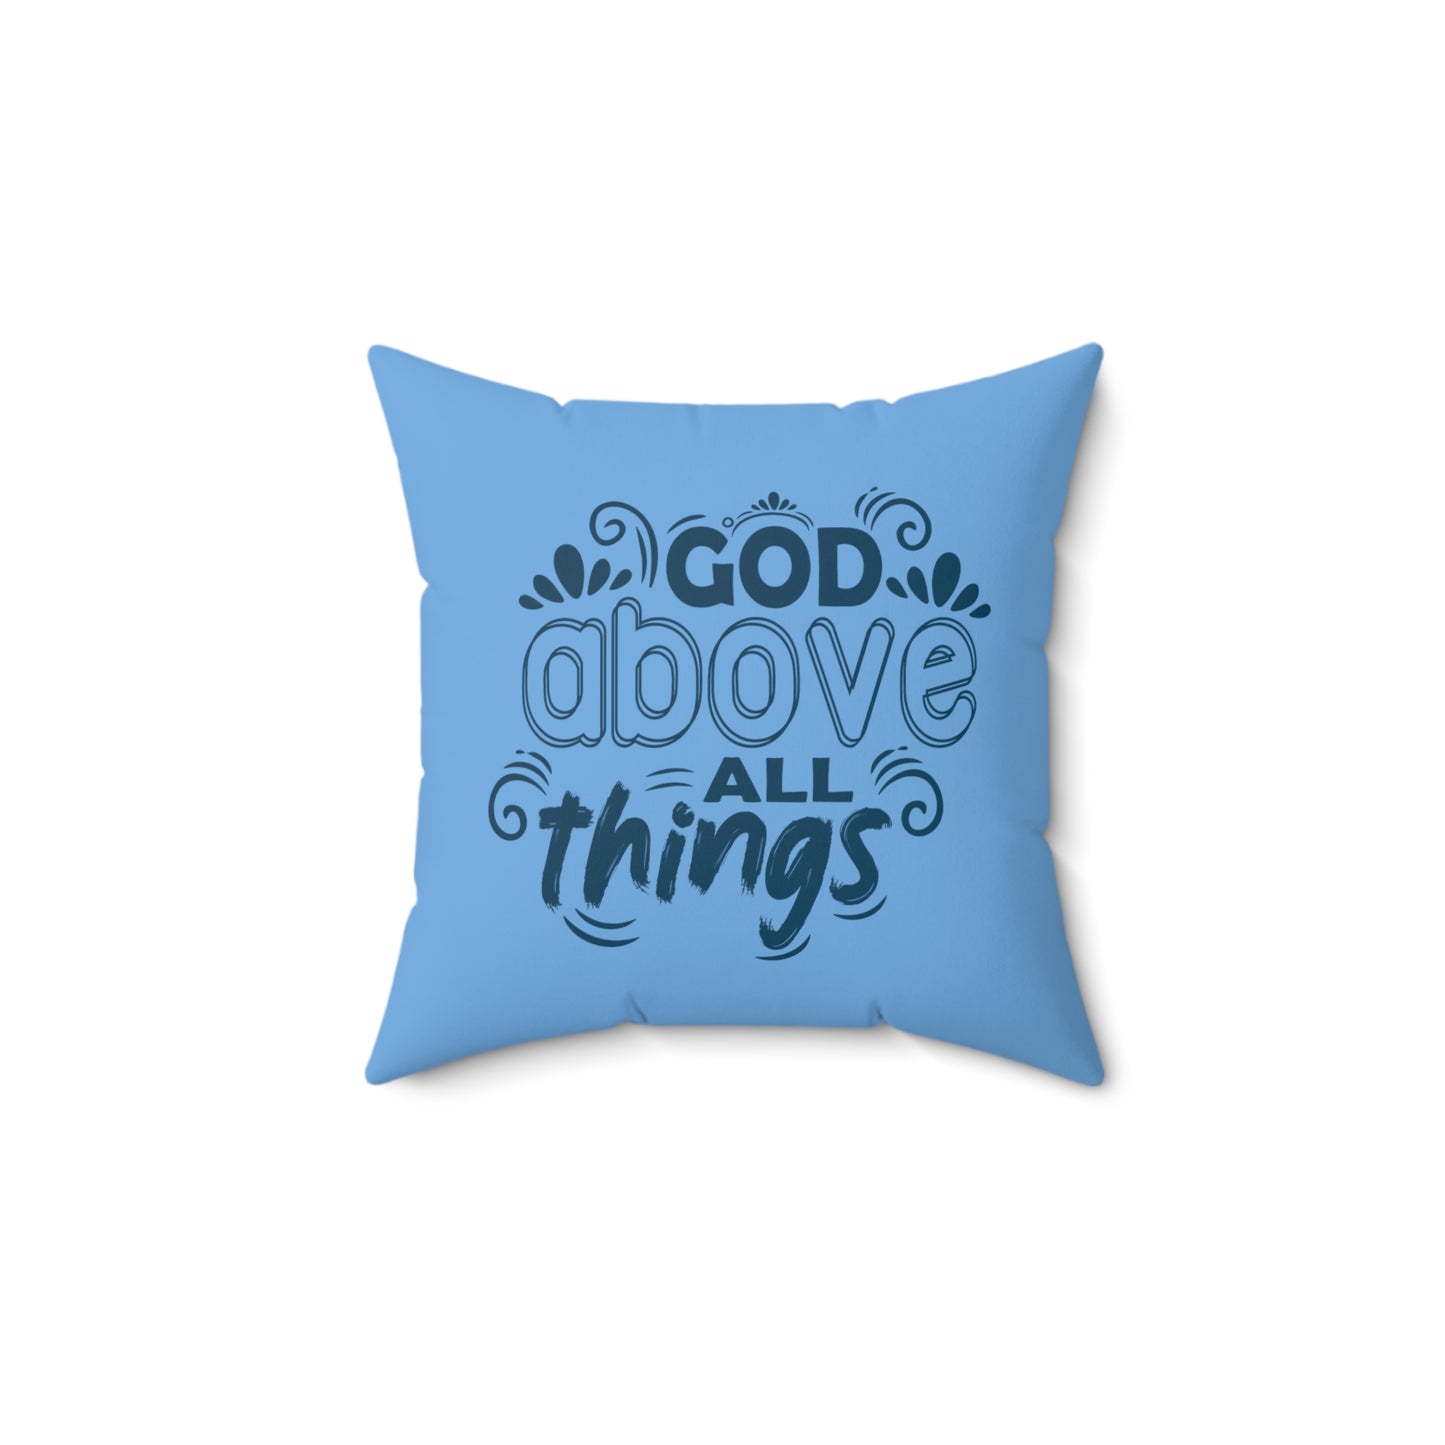 God Above All Things Pillow